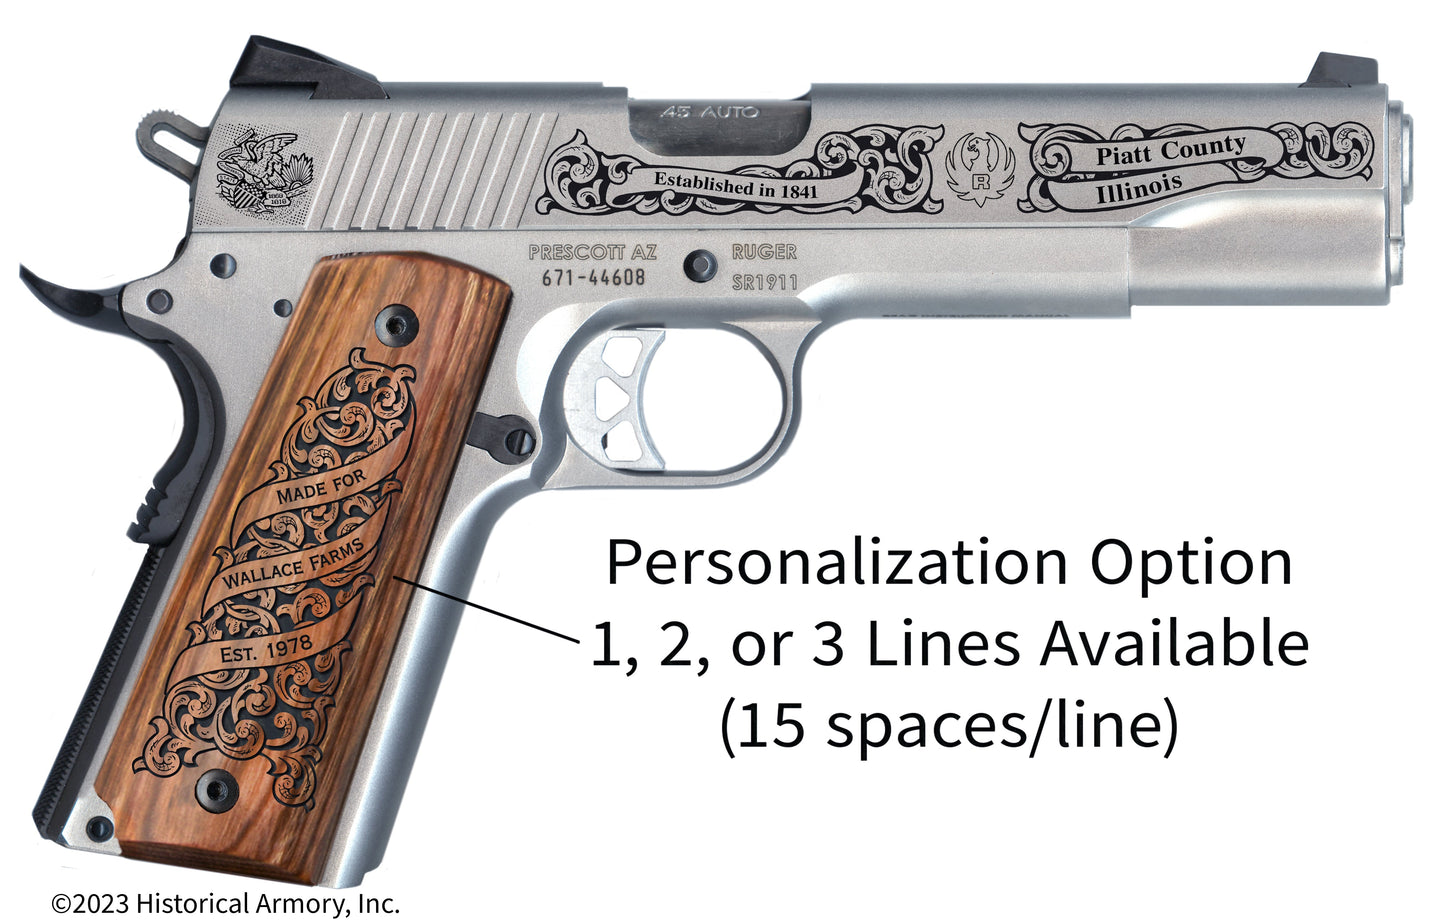 Piatt County Illinois Personalized Engraved .45 Auto Ruger 1911